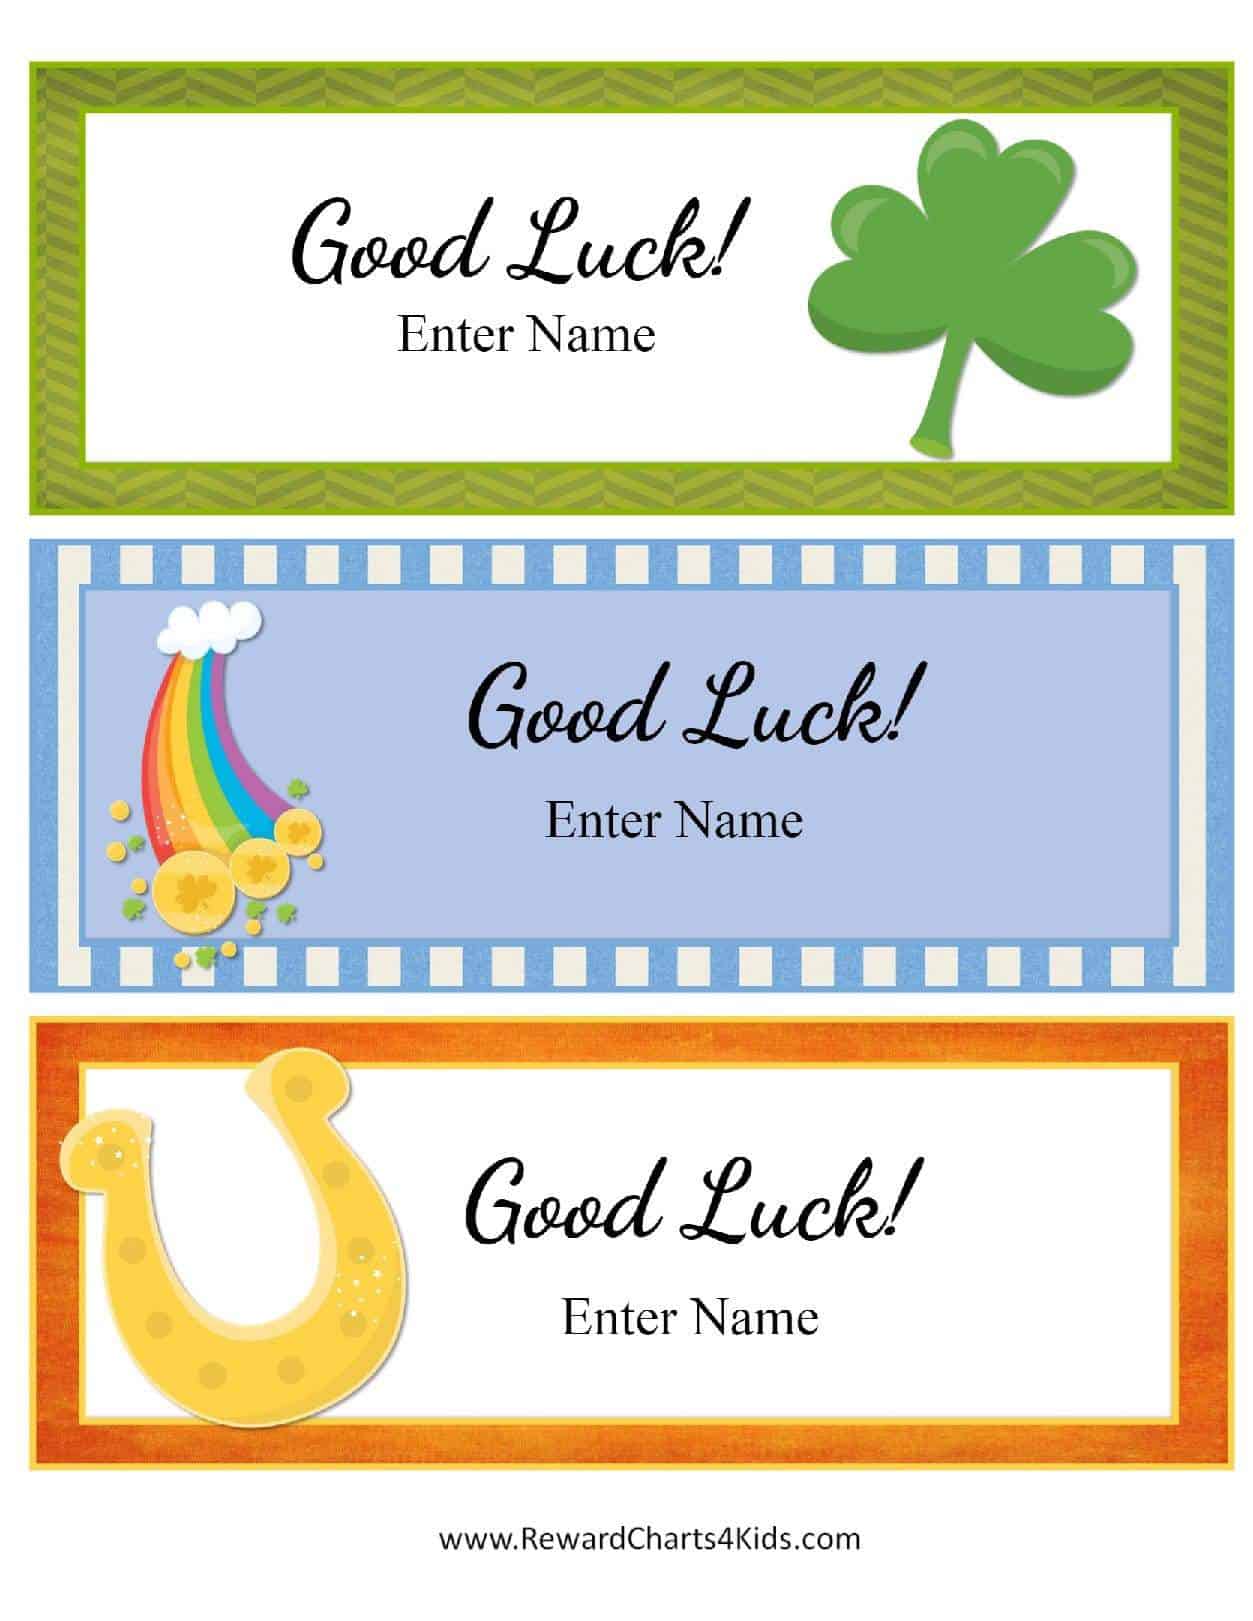 free-good-luck-cards-for-kids